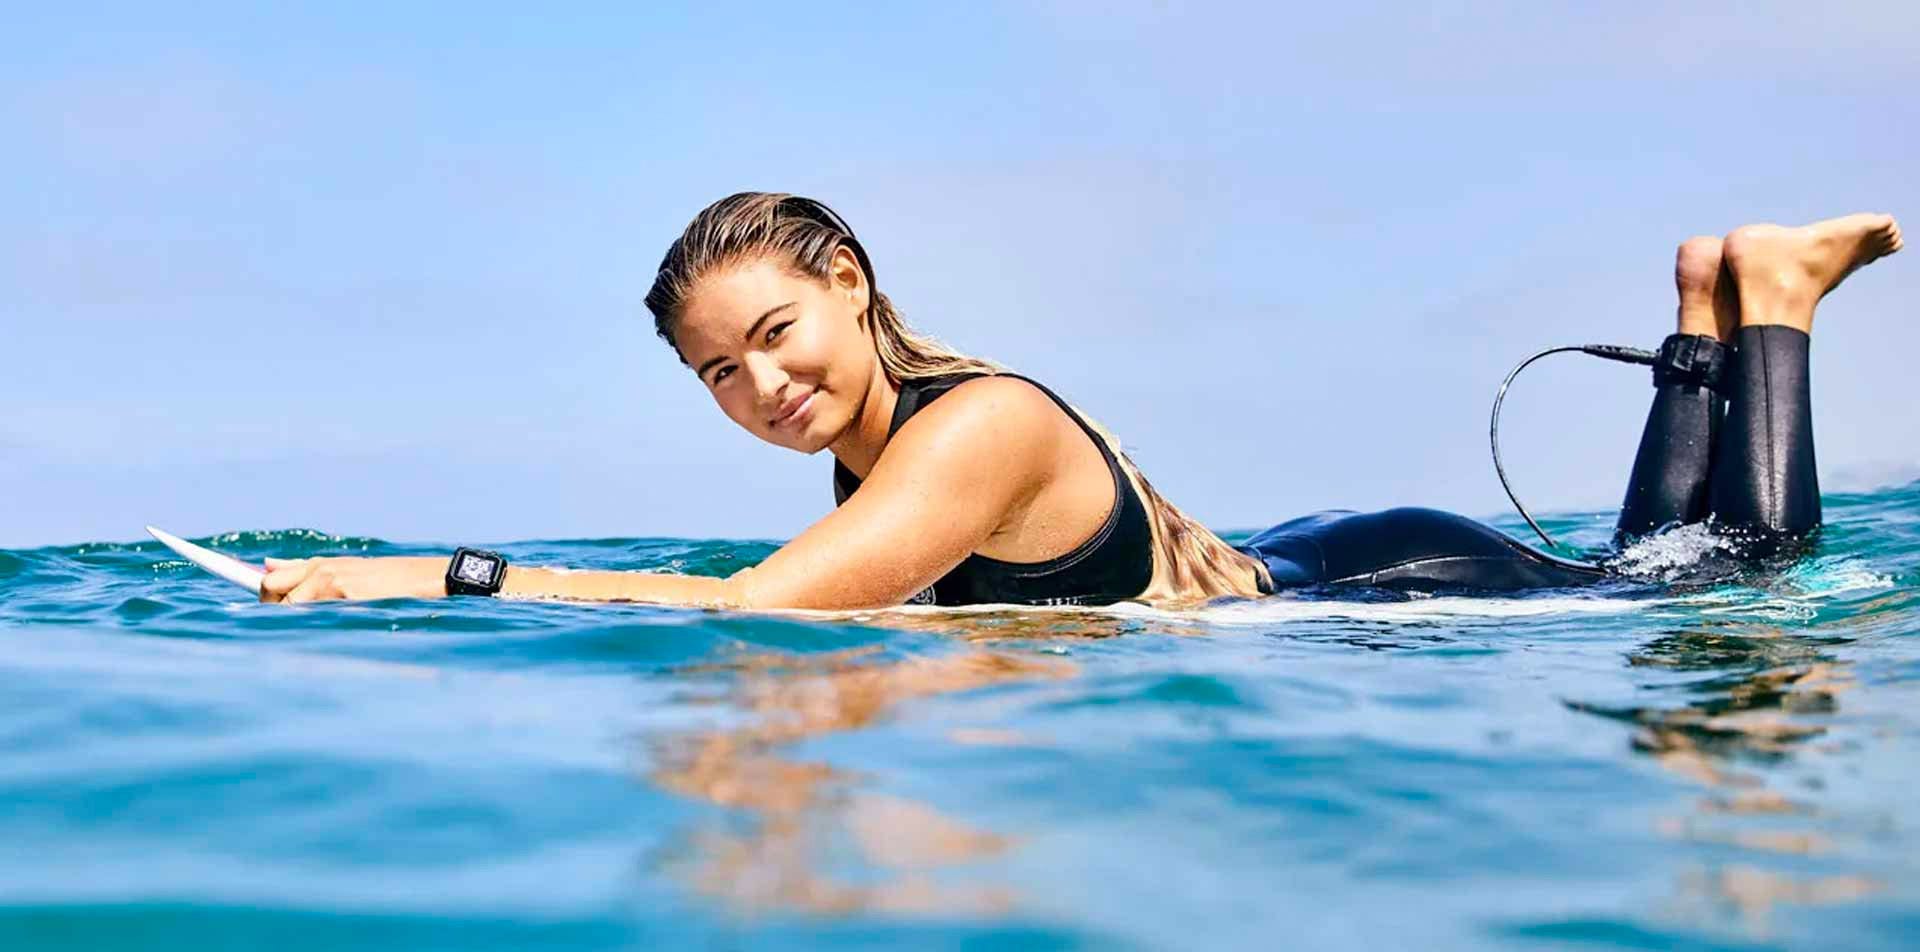 Leah Thompson laying on a surfboard